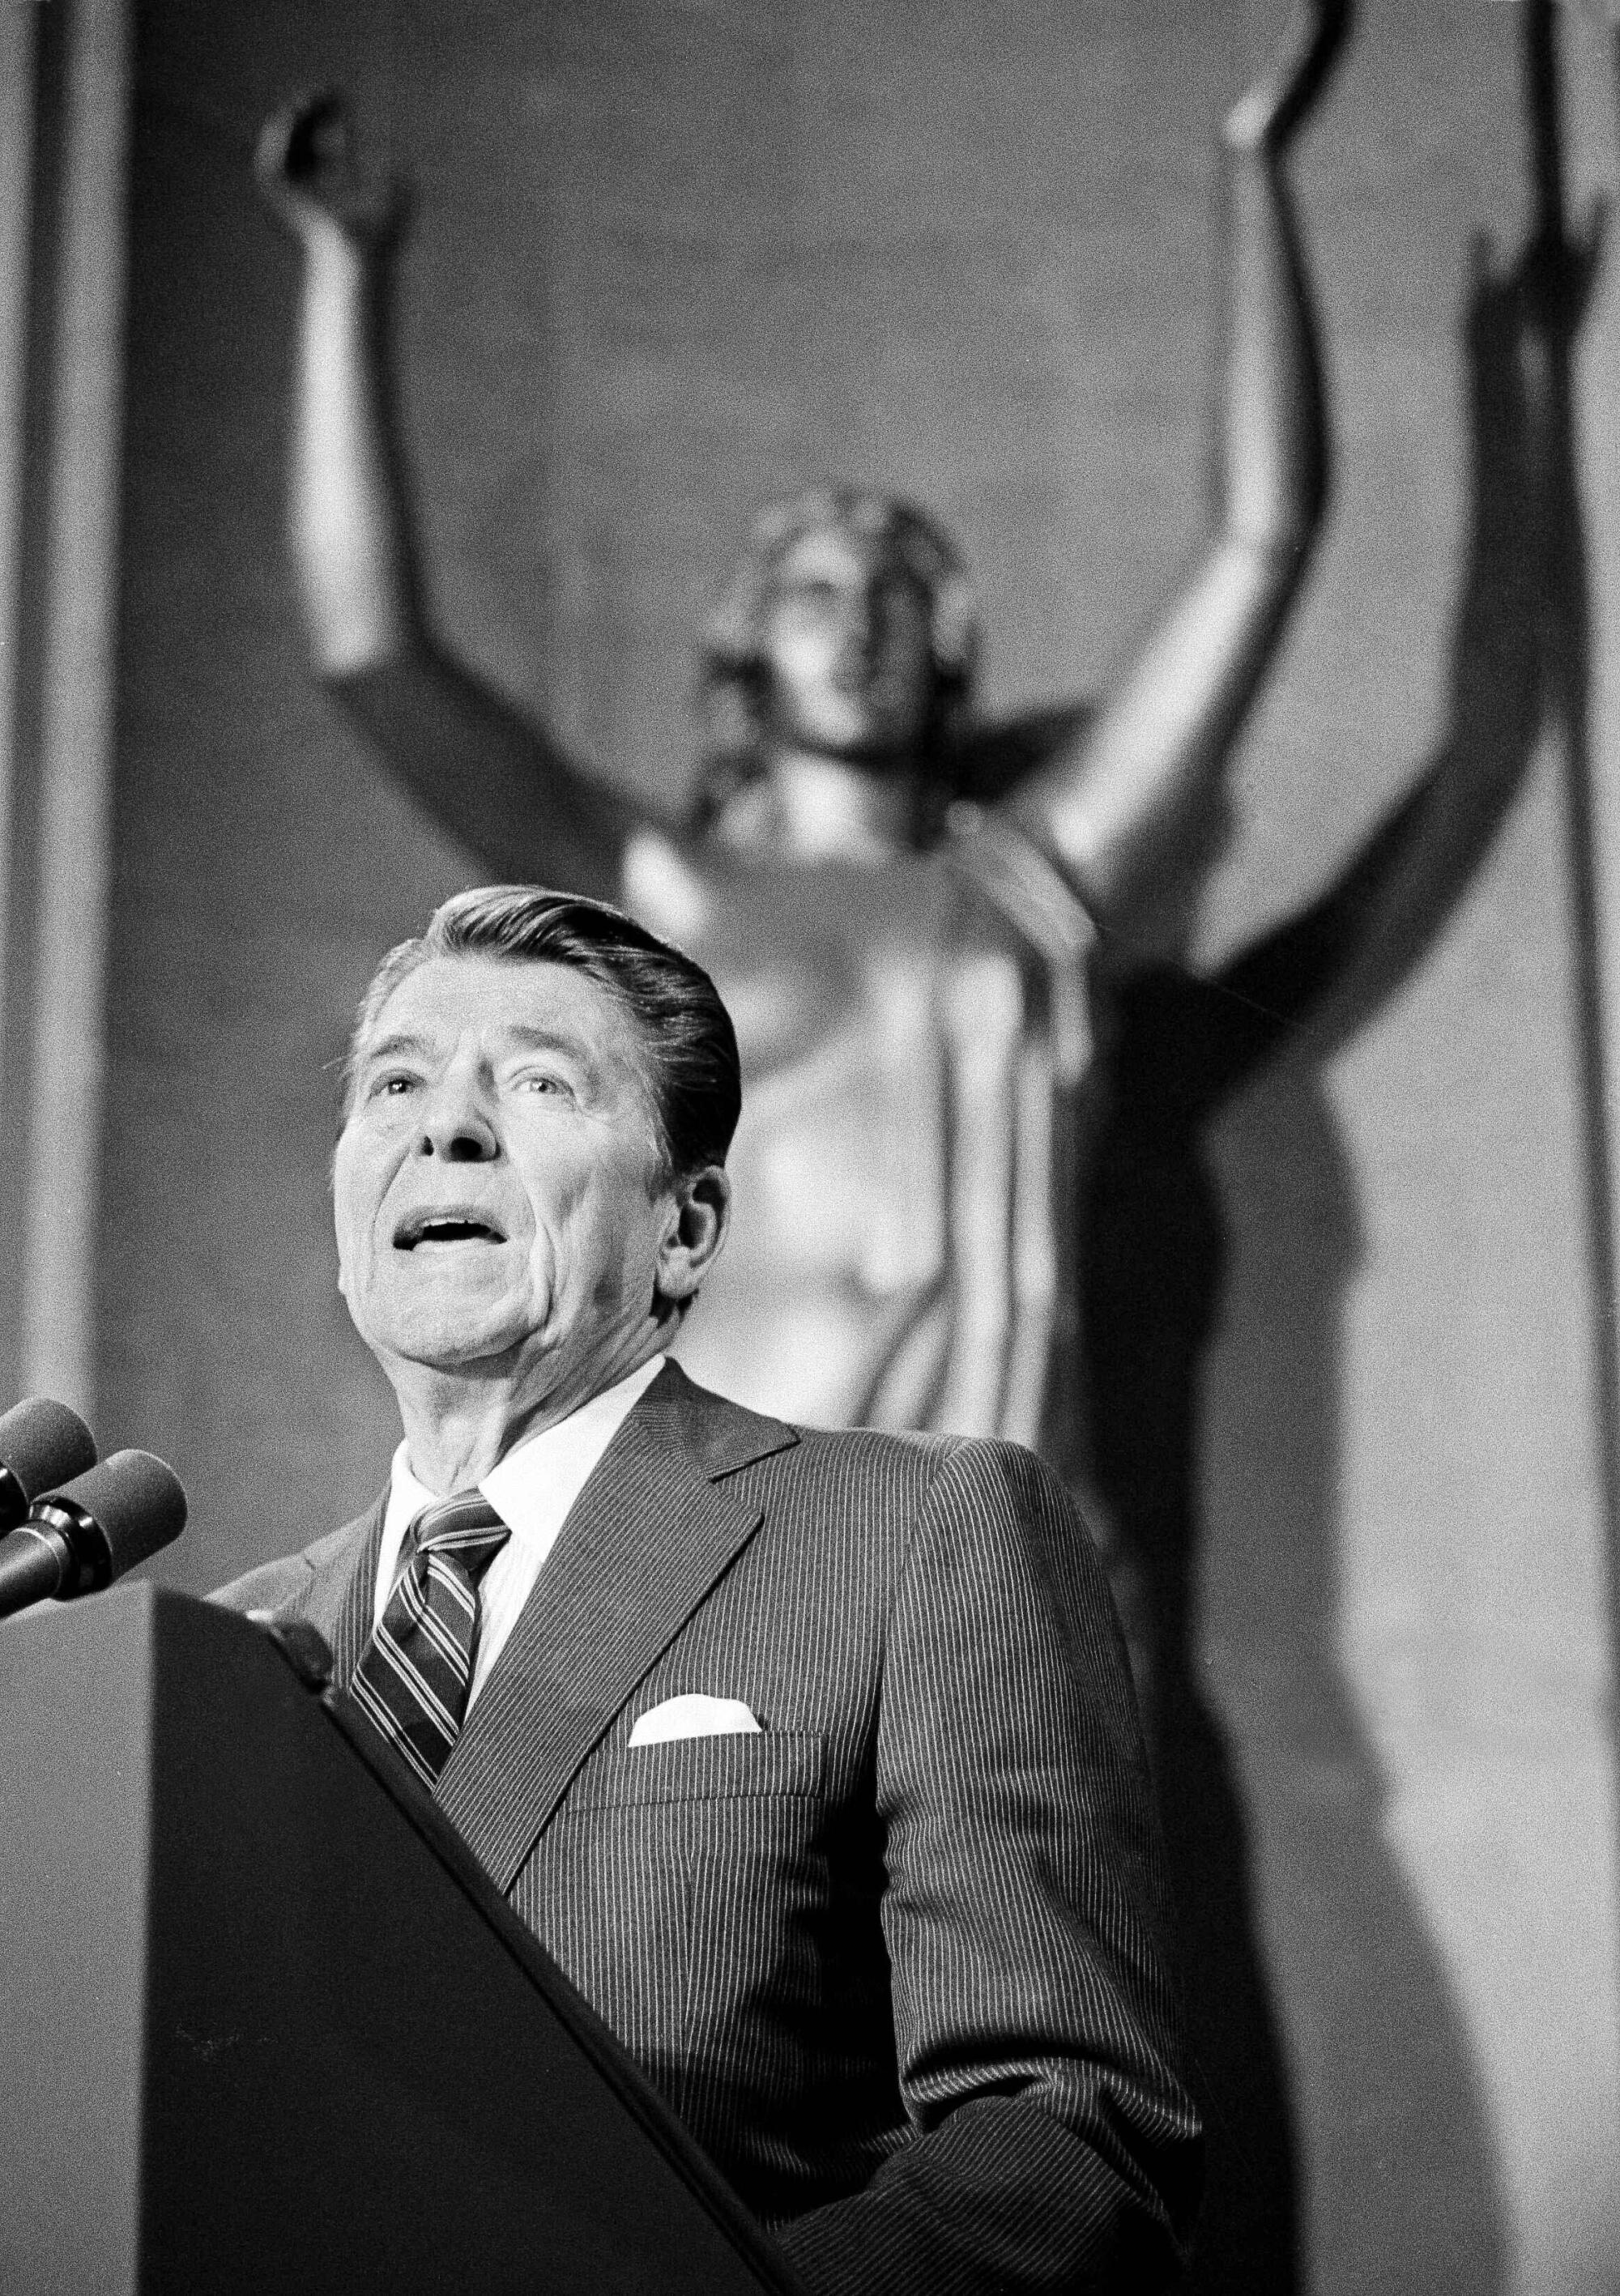 In a vintage black-and-white image, Ronald Reagan is seen standing at a podium before the scales of justice.